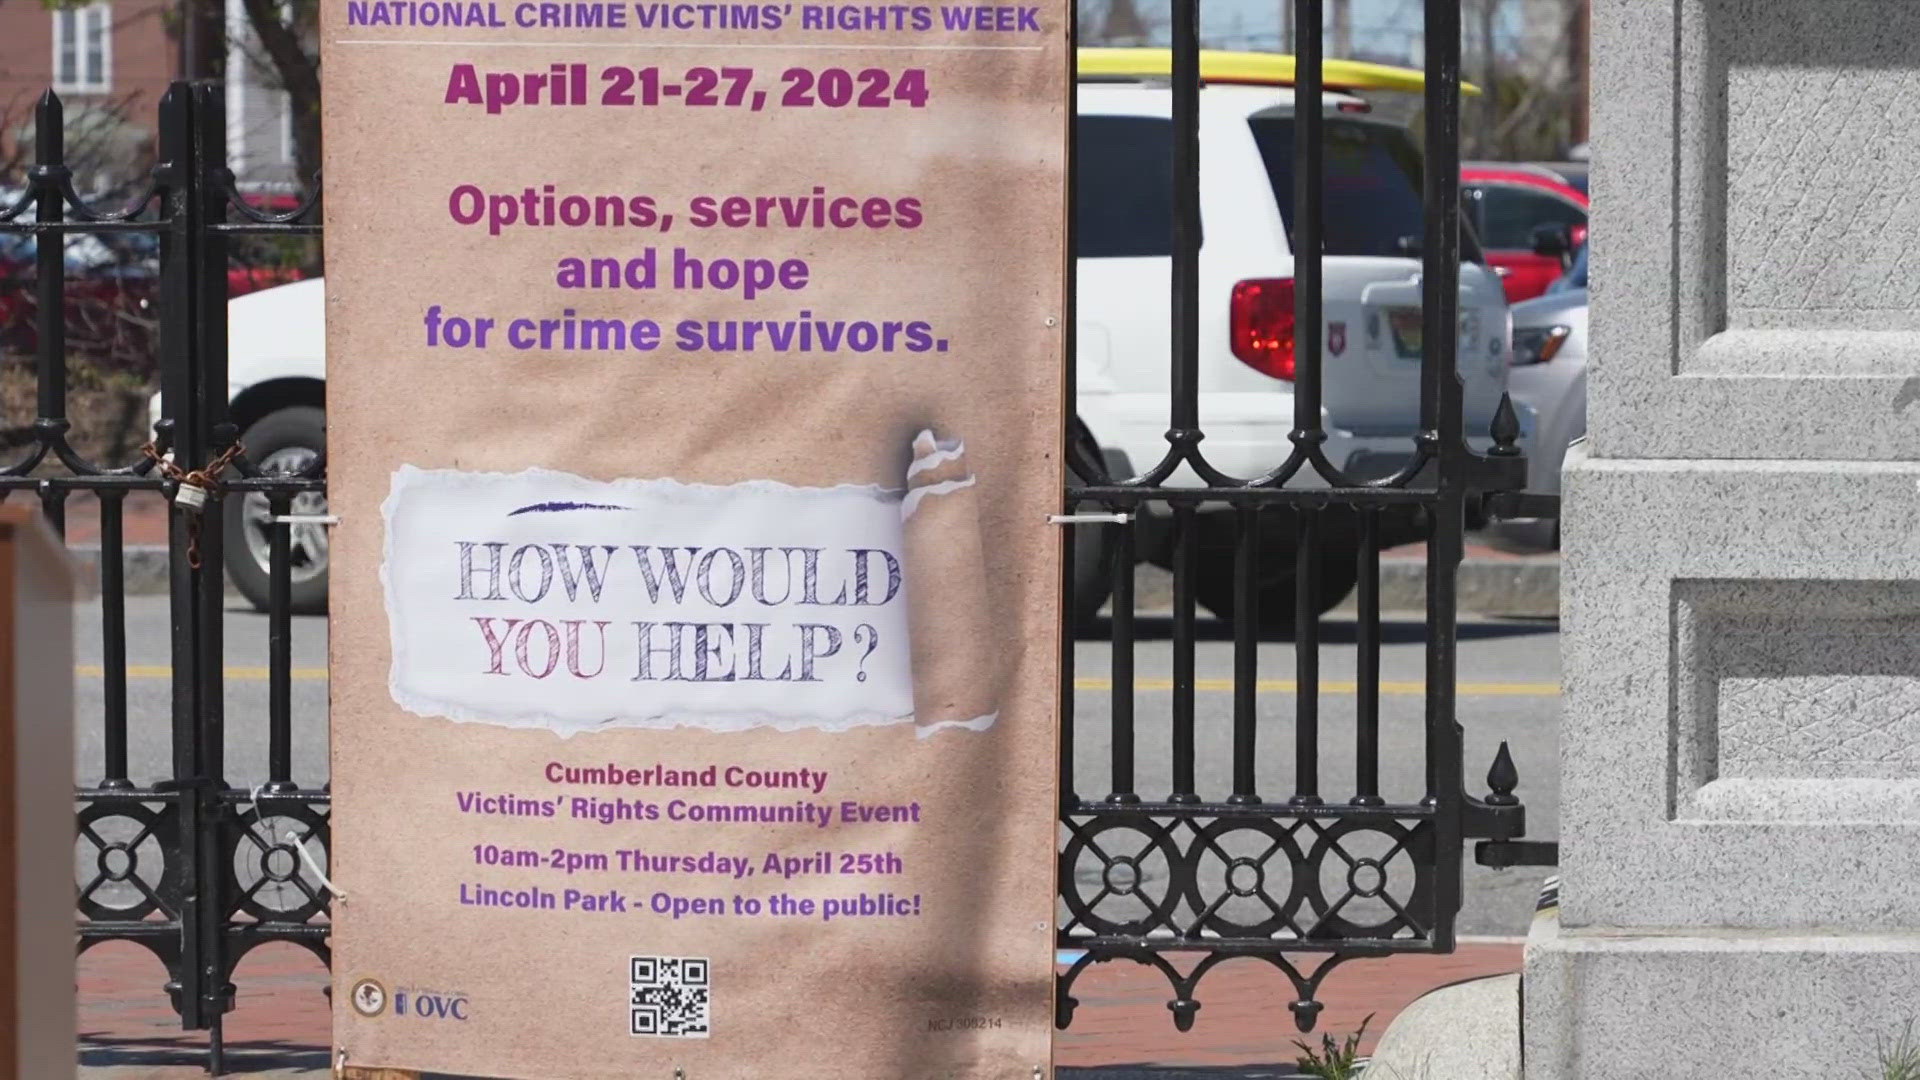 The annual awareness week highlights the work of victim and witness advocates, and their availability to people in need.